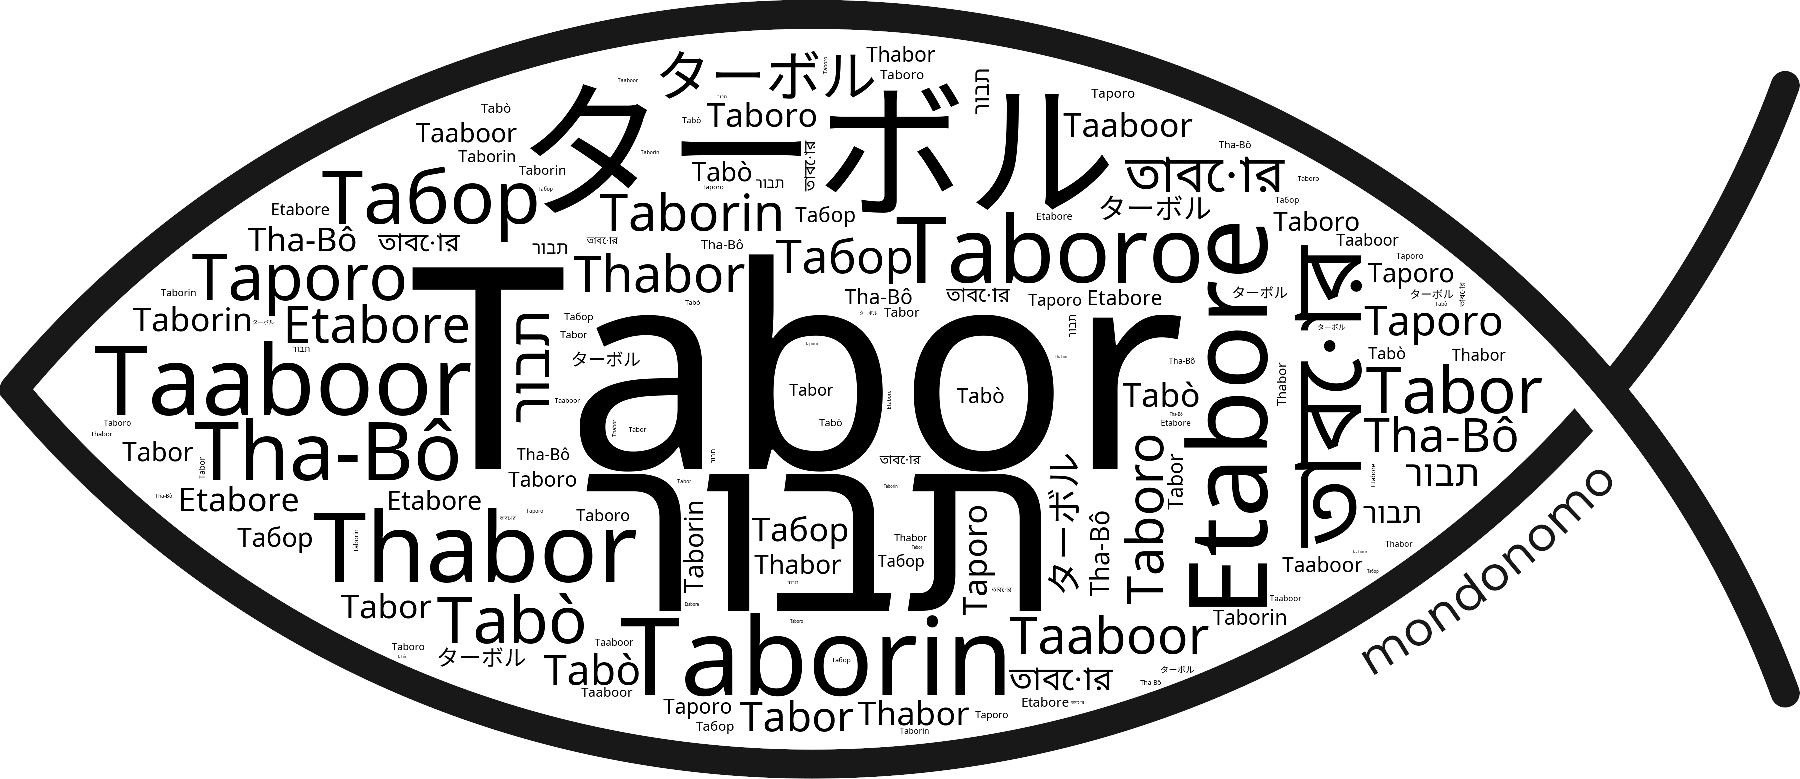 Name Tabor in the world's Bibles